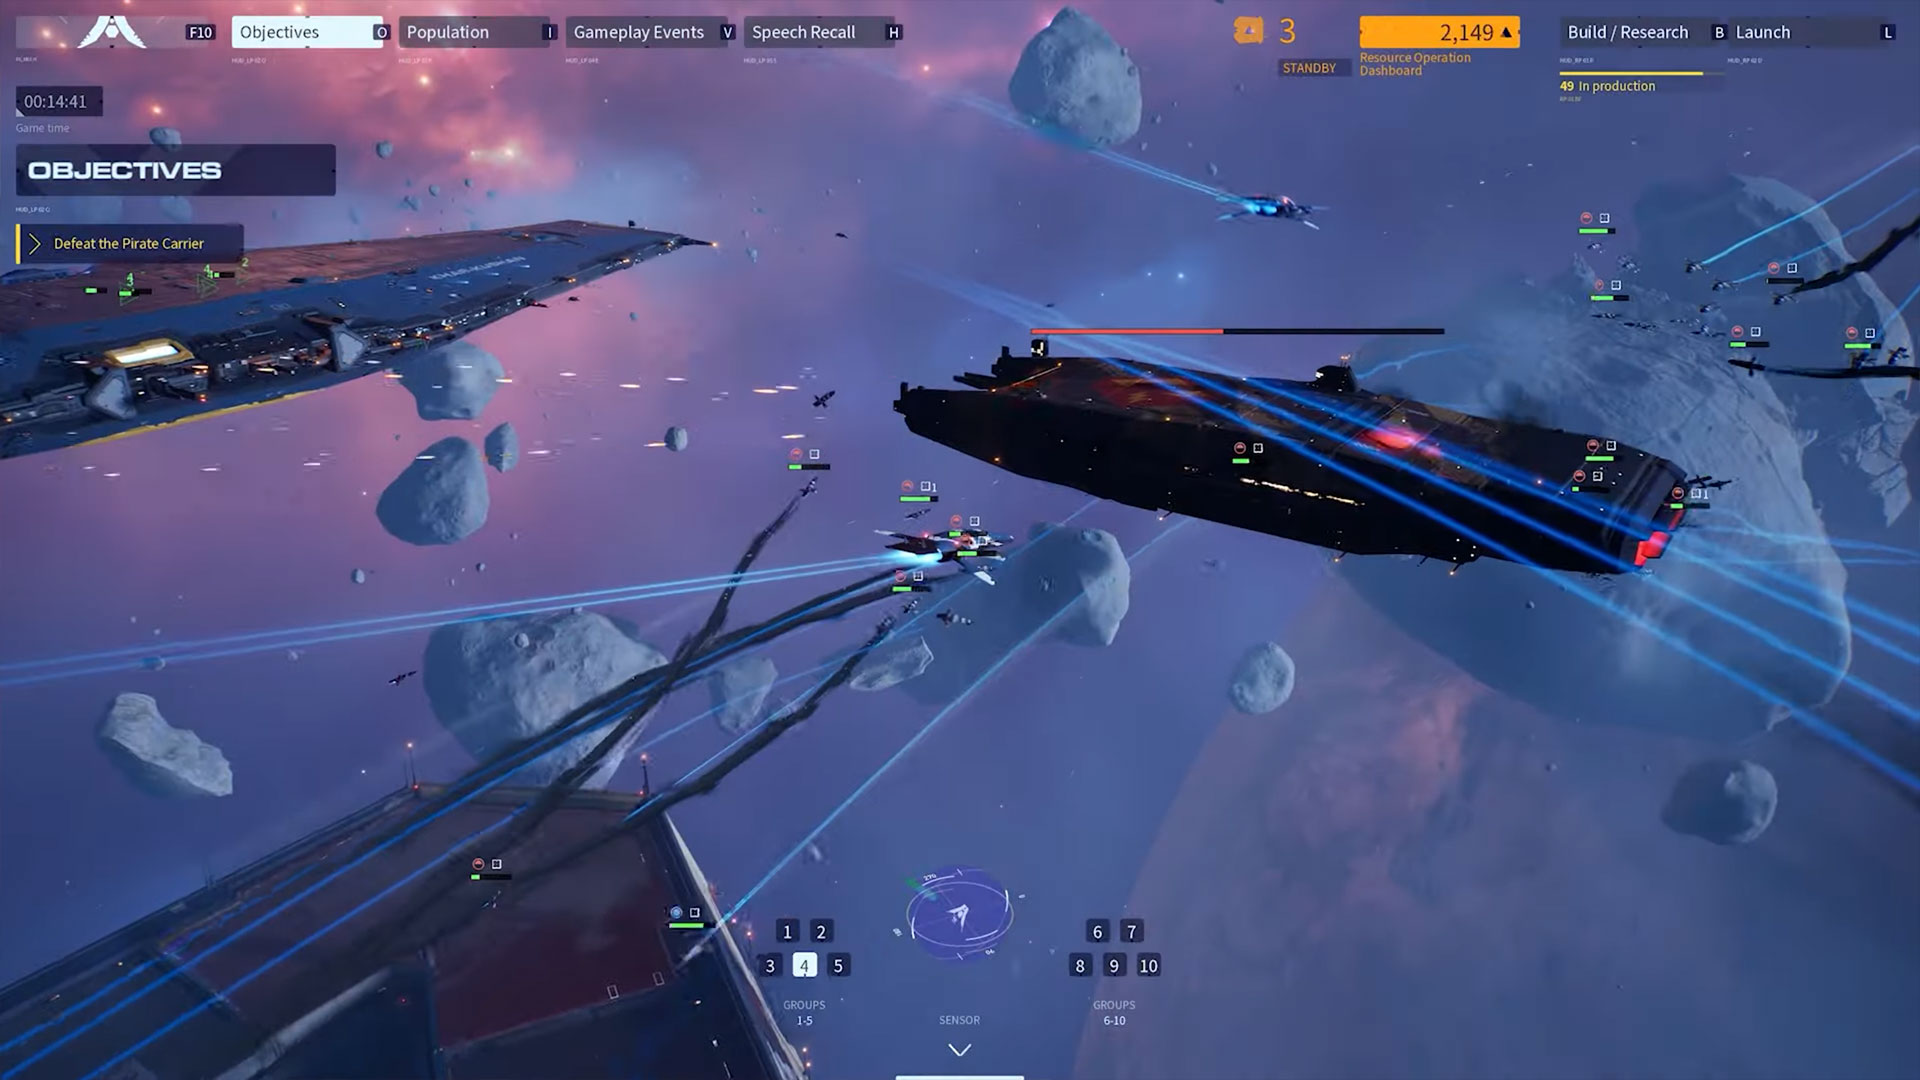 Get a behind-the-scenes look at the development of Homeworld 3 in this new documentary